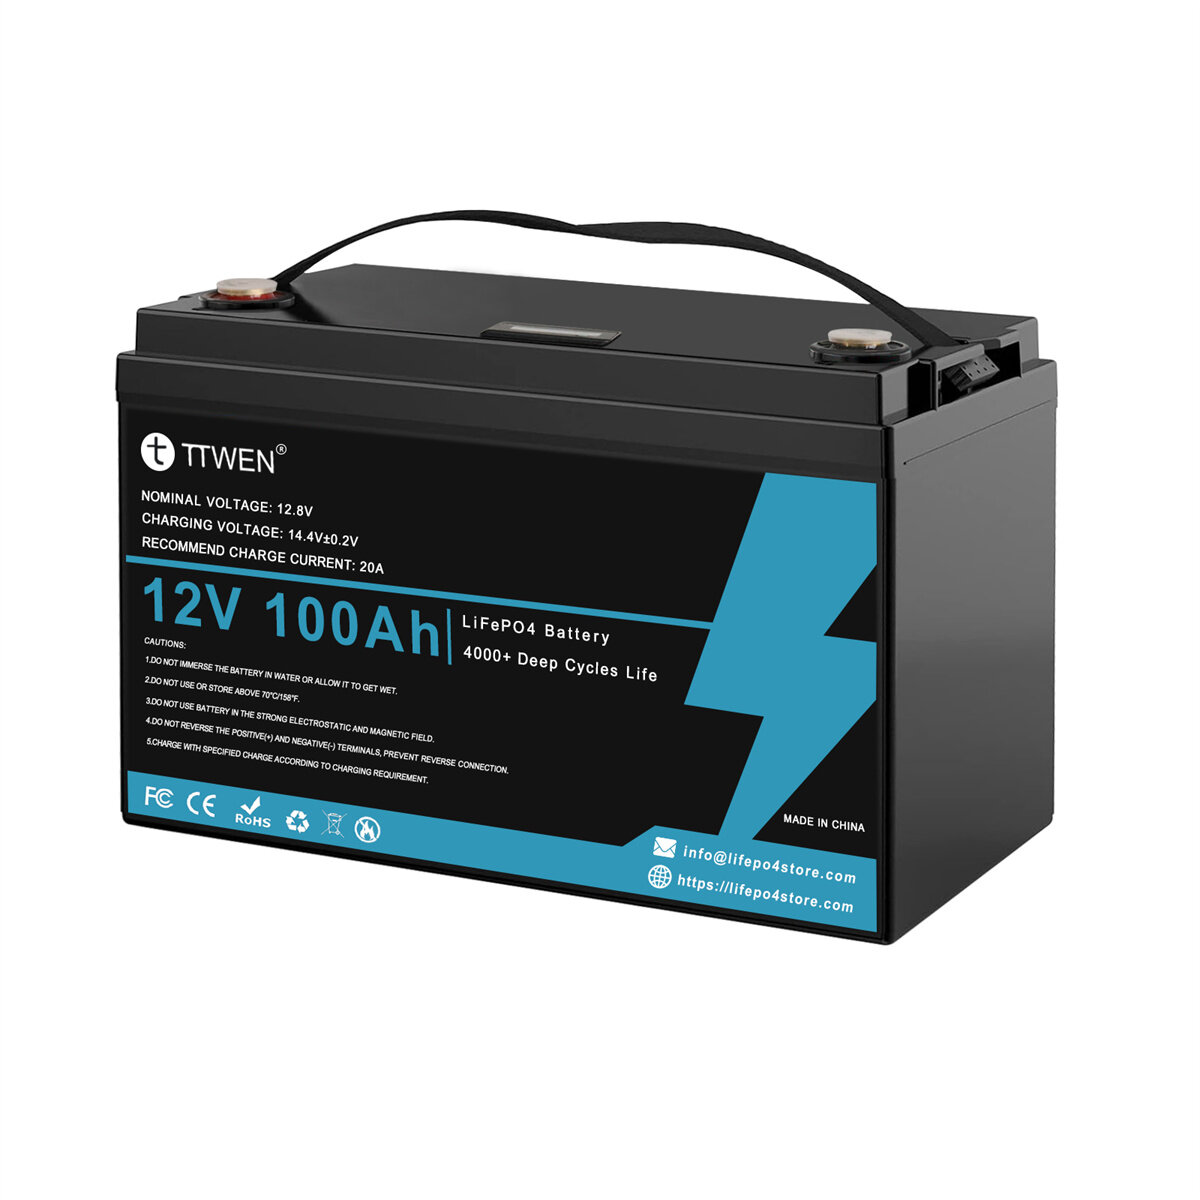 Image of [EU Direct] TTWEN 12V 100Ah Lifepo4 Battery Pack with 100A BMS Temperature Protection 4000+ Times Deep Cycles 1280Wh Lit